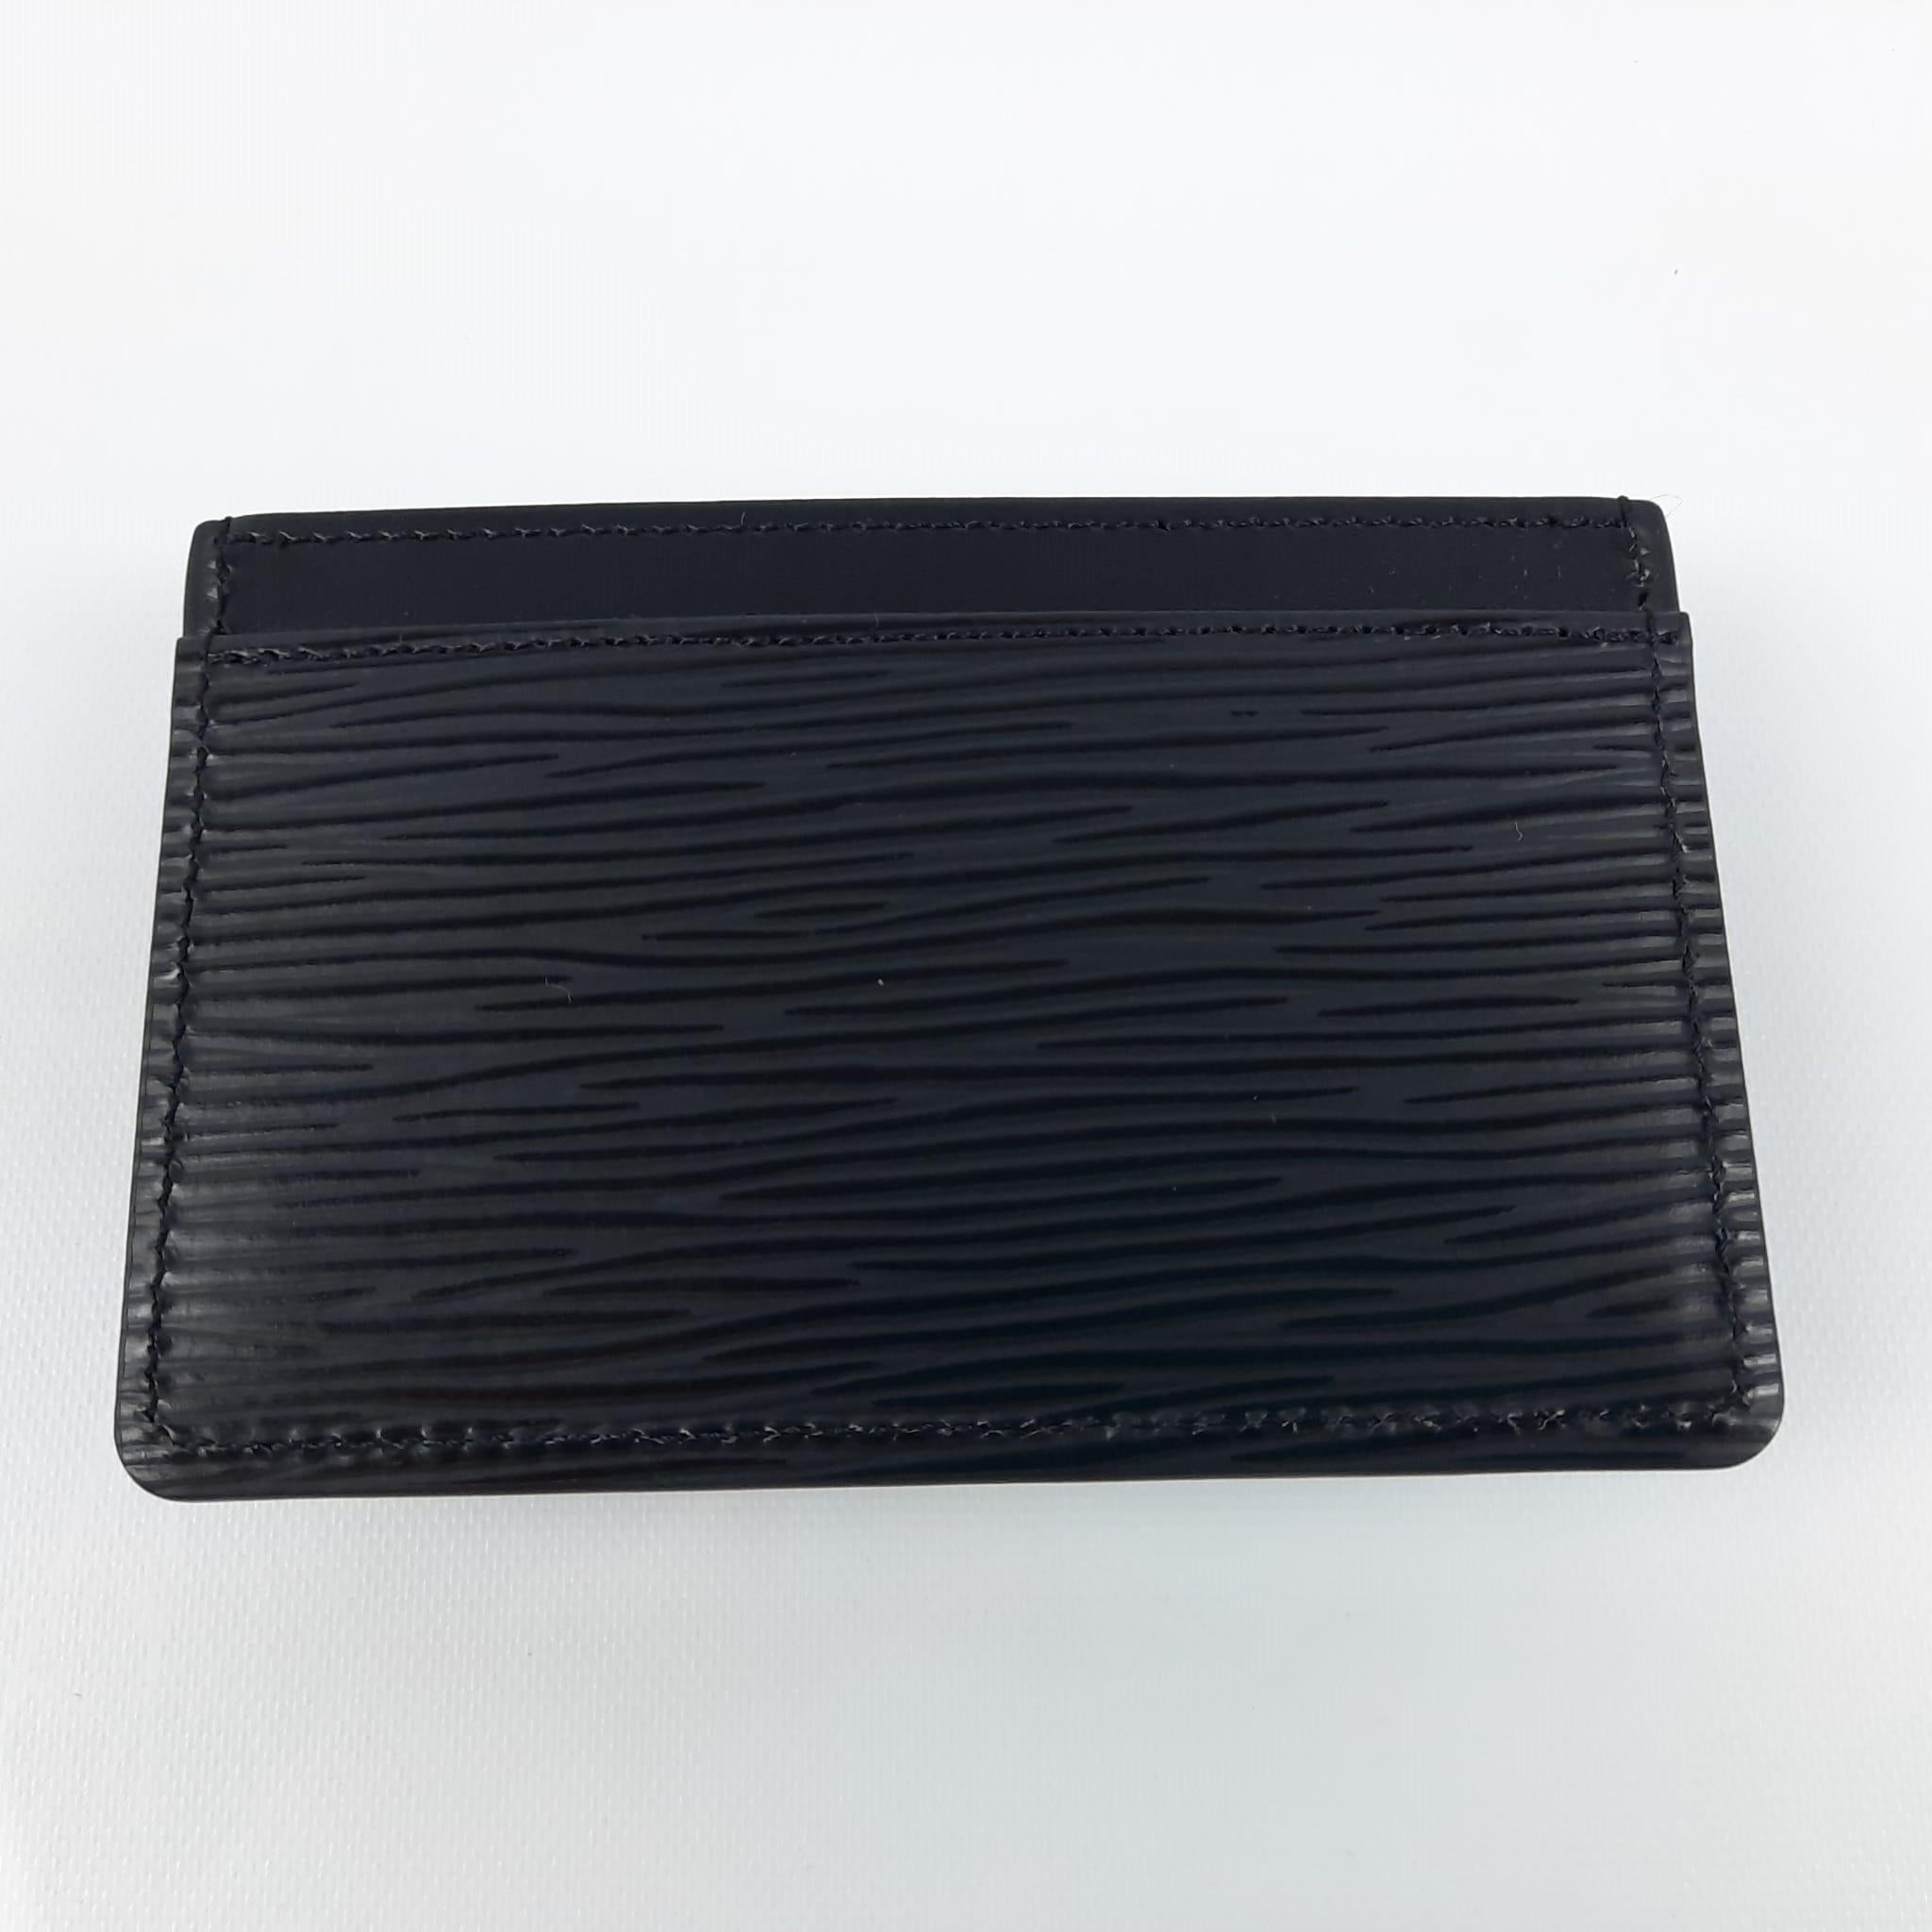 This simple card holder in Epi leather slips very naturally into the pocket. It contains in its three slots, credit, transport or business cards.